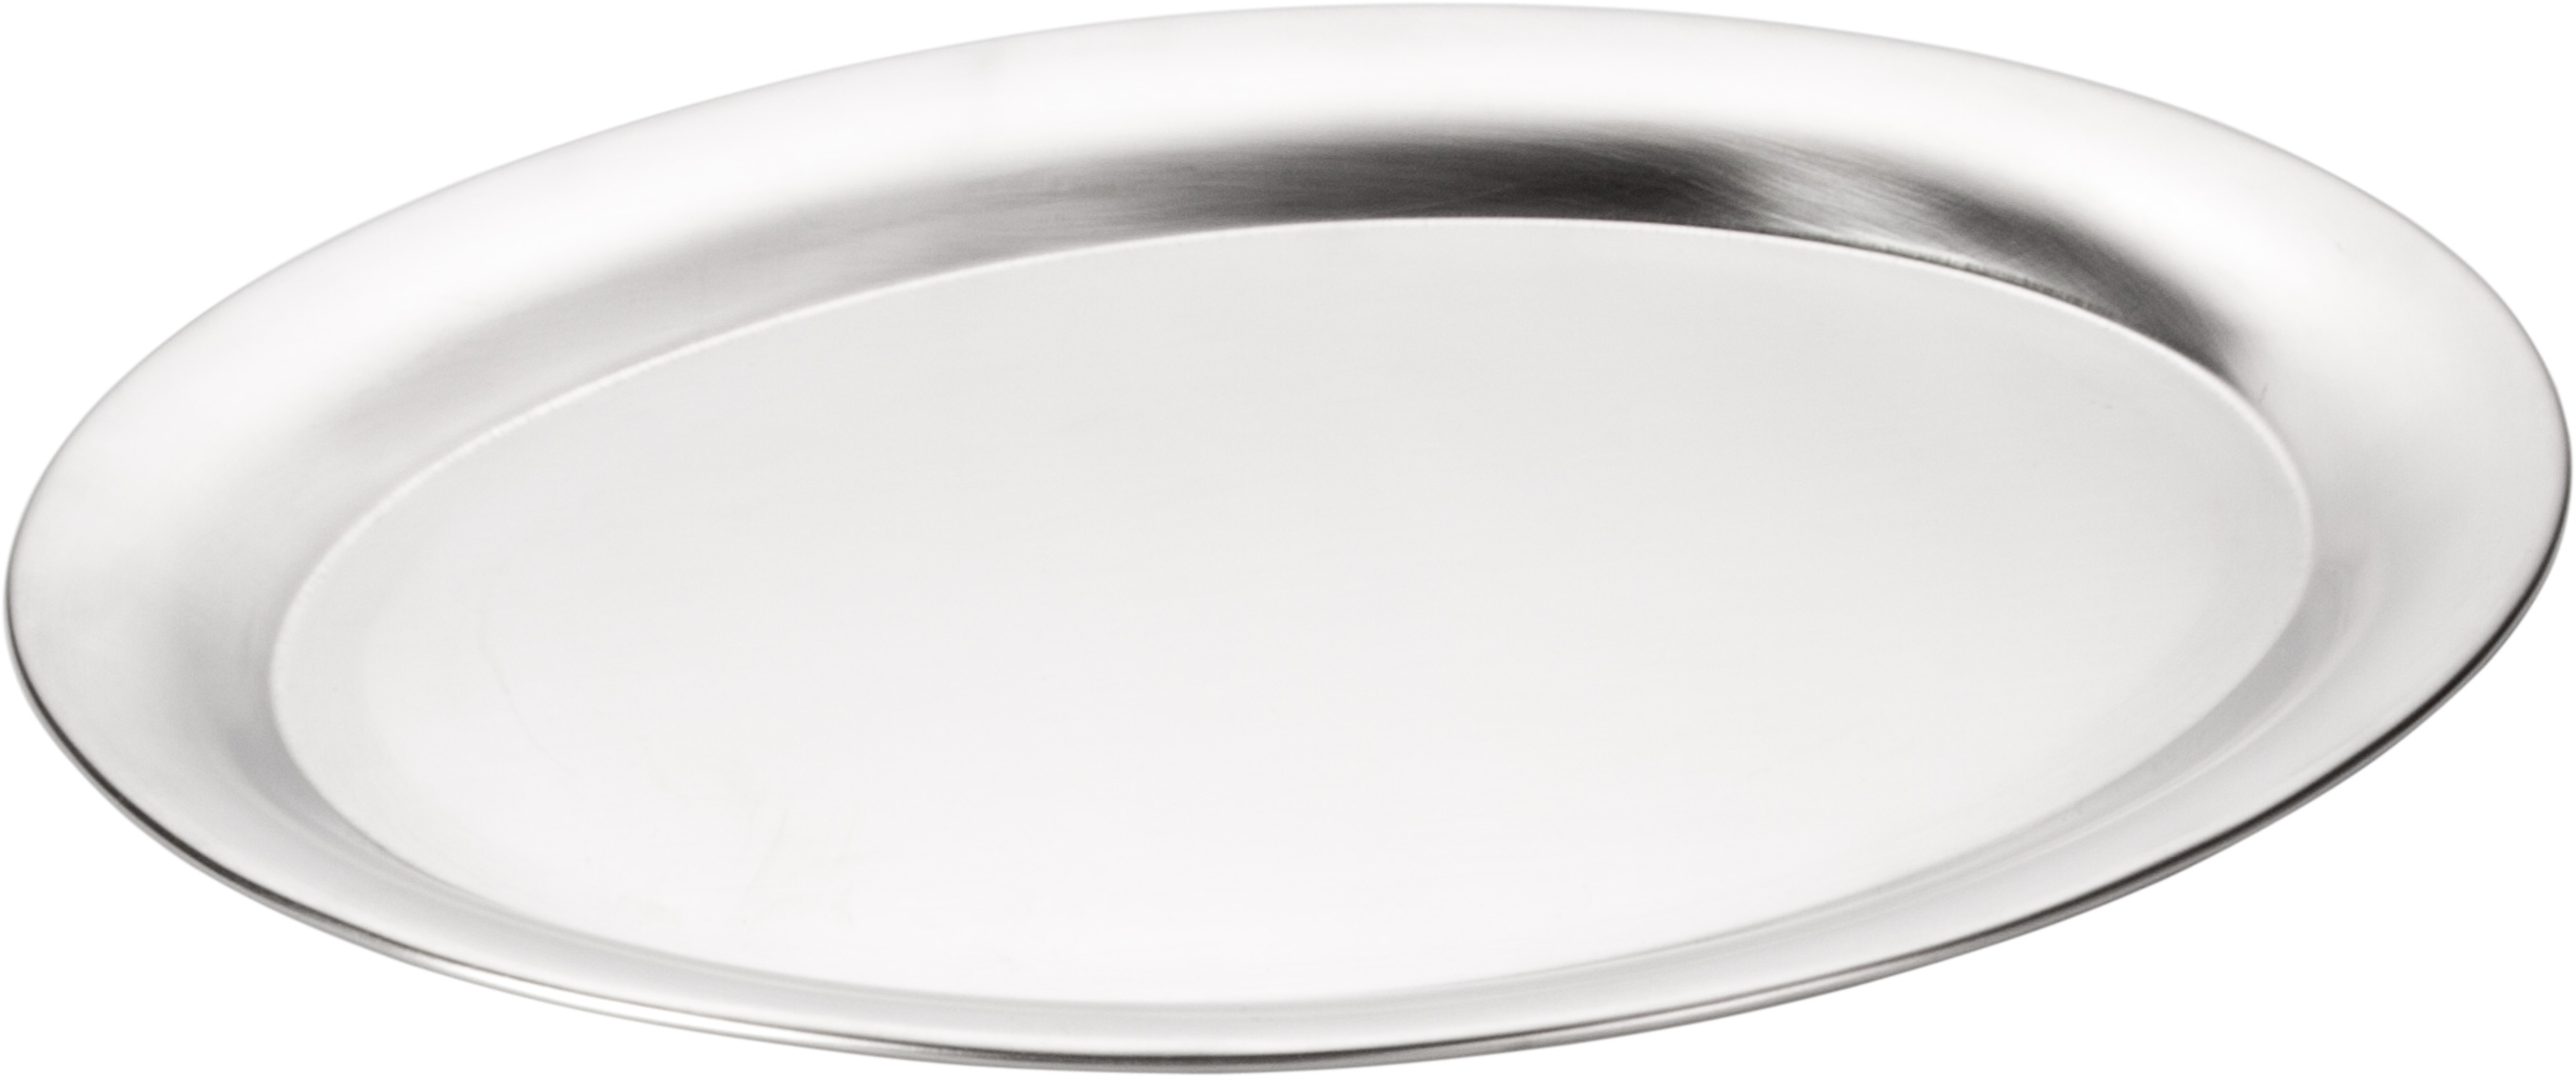 Serving tray oval, stainless steel mat - 19,5x15cm